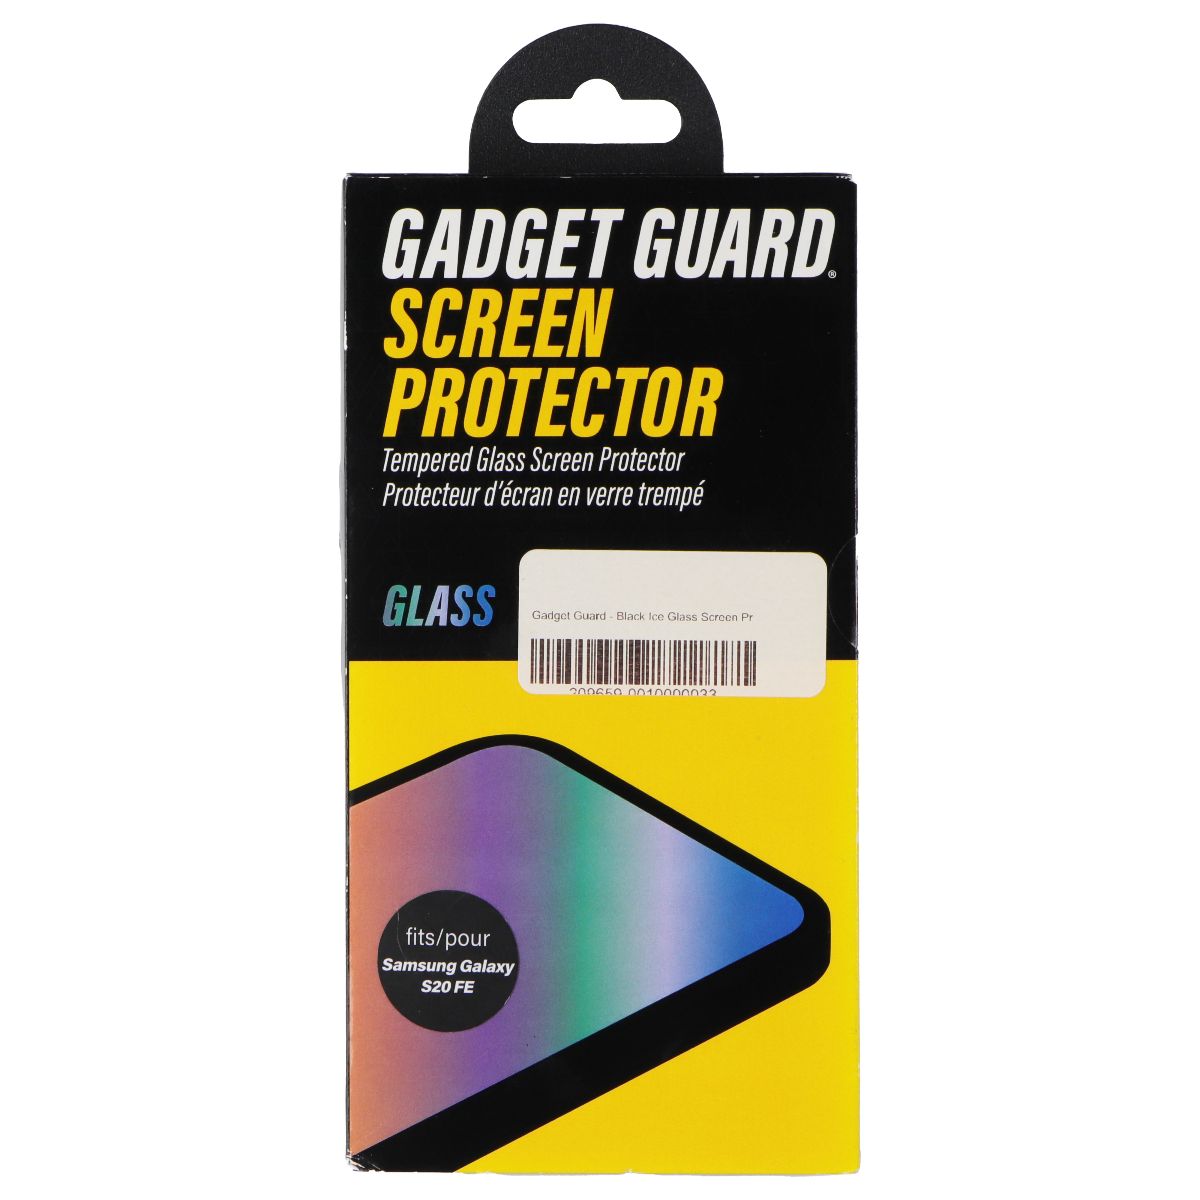 Gadget Guard Glass Edition Screen Protector for Samsung Galaxy S20 FE